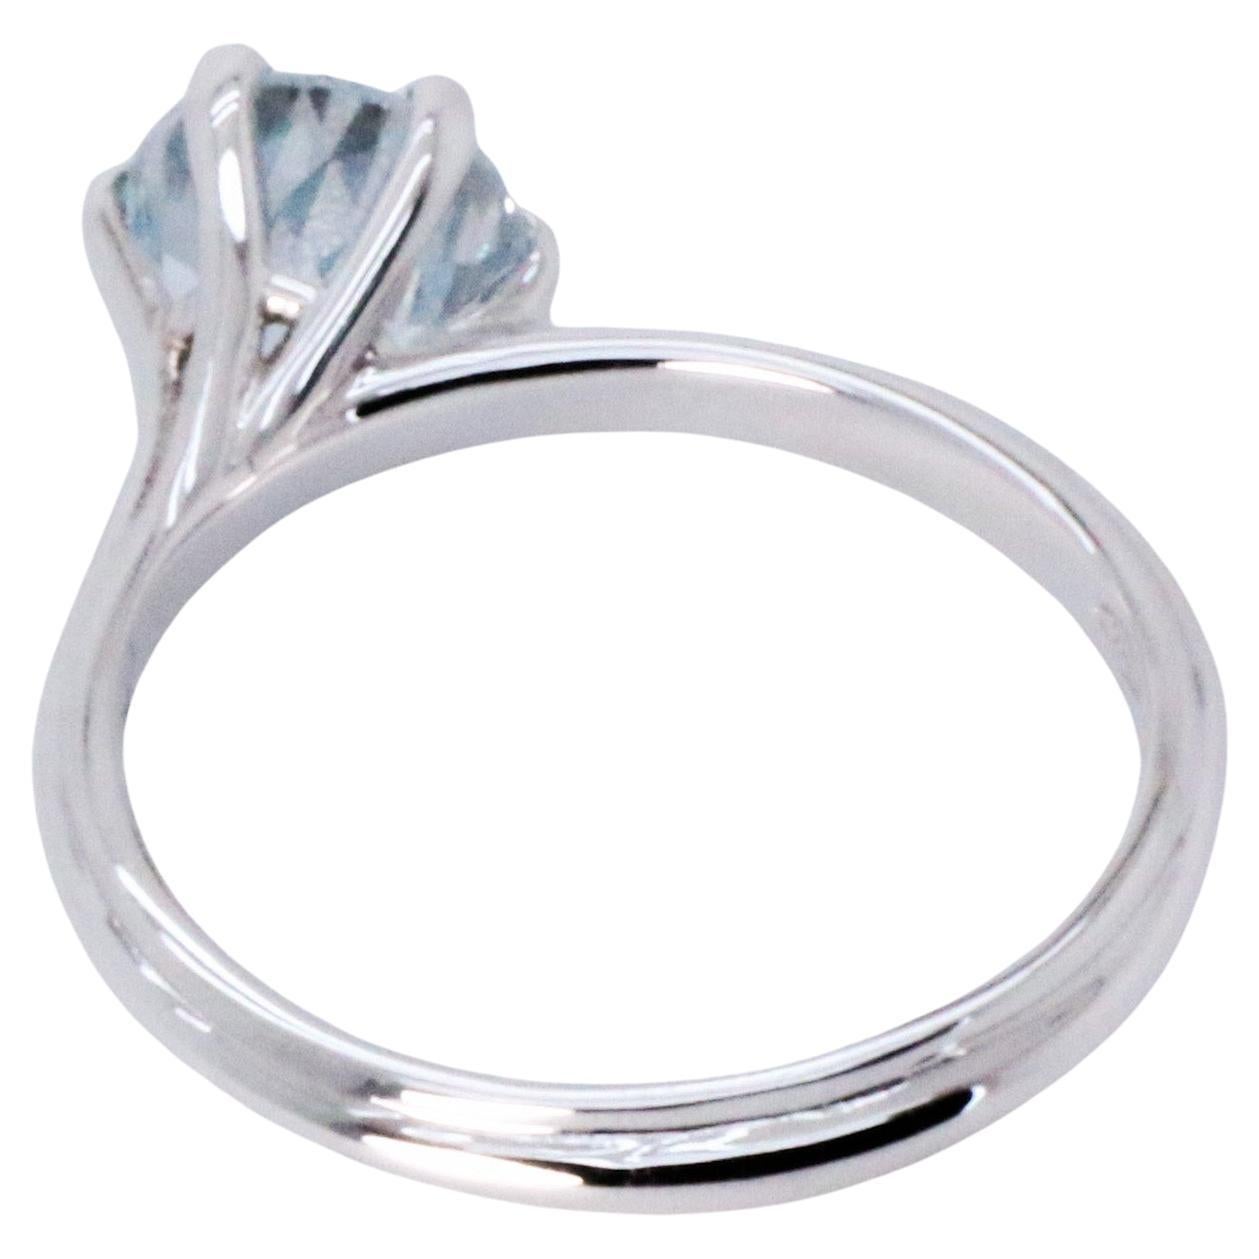 18K White Gold Asymmetric Cosmic Design Stackable Aquamarine Cocktail Ring.
The stackable Egle ring is made of 18 karat white gold and features a round mixed cut natural aquamarine around 1.45 carats, diameter 6.7 mm. The total weight of the ring is